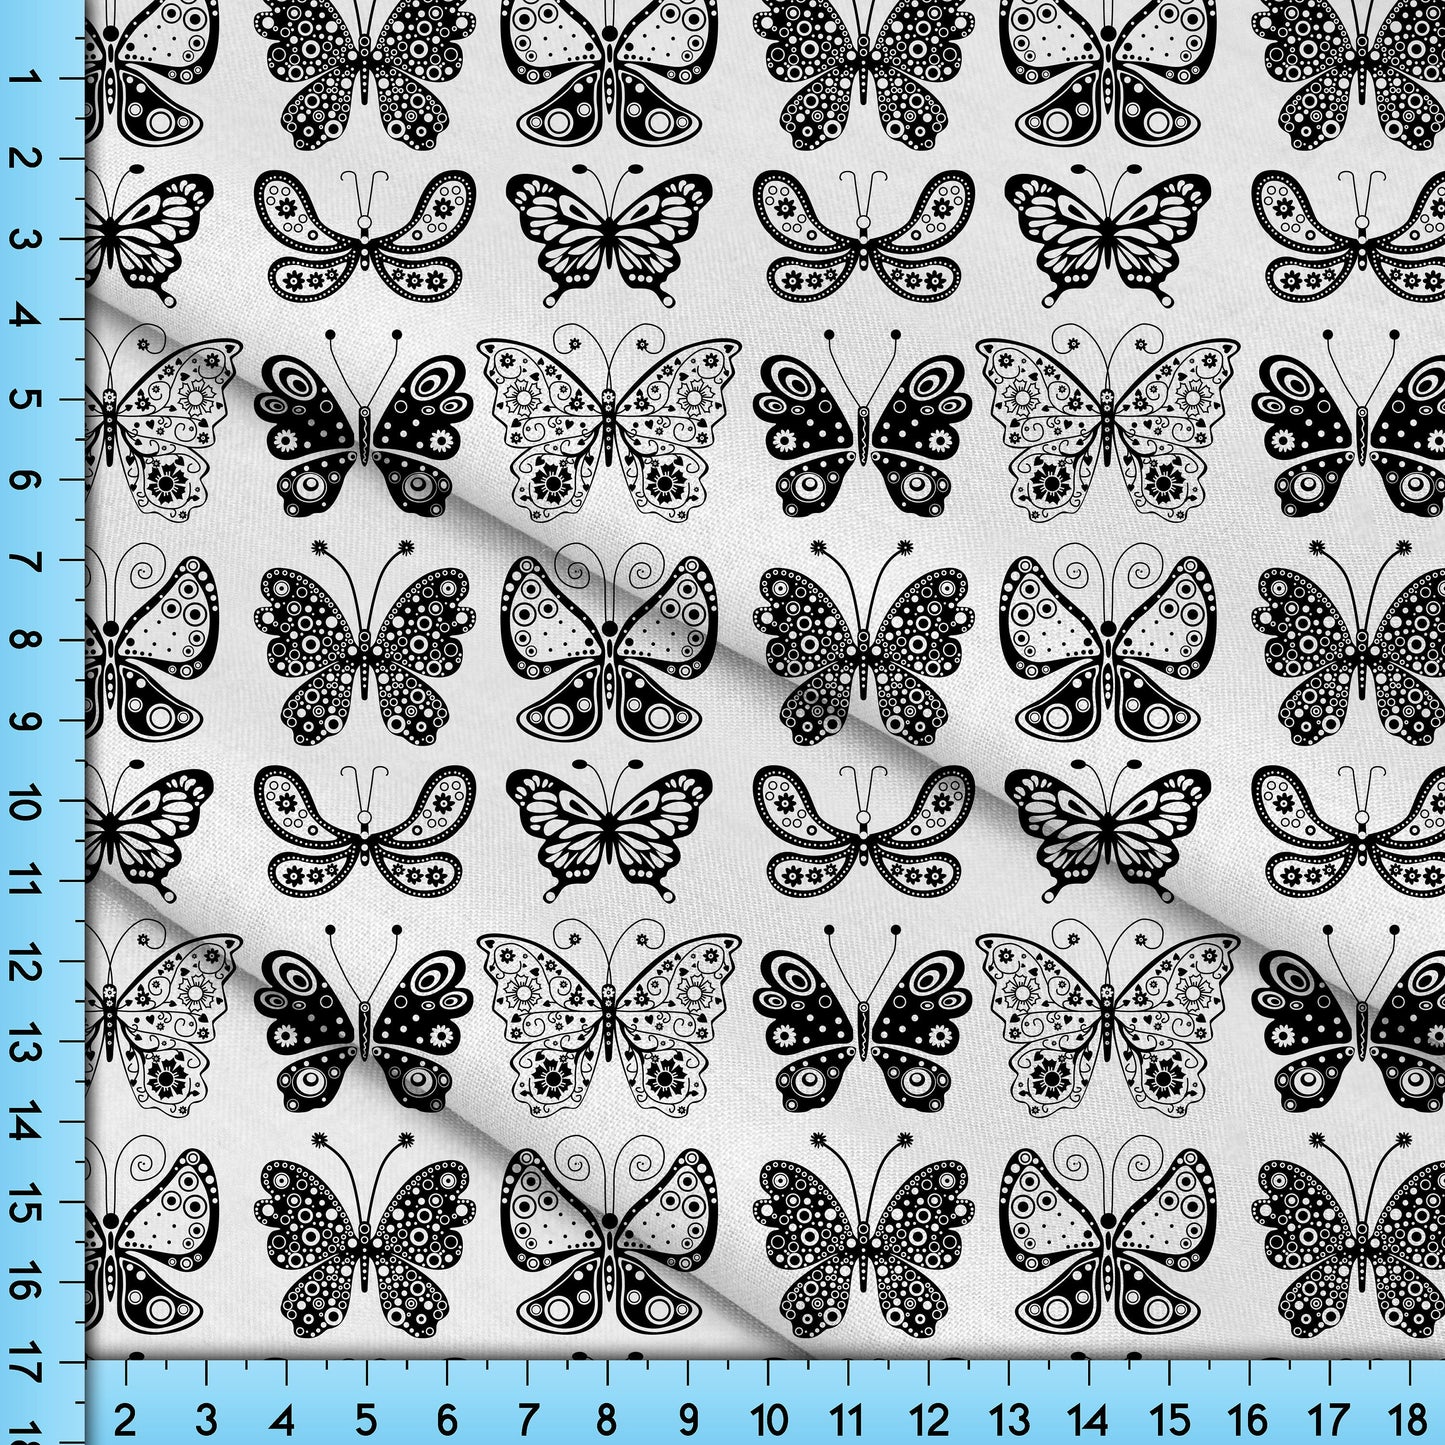 Butterfly Fabric, Black and White Butterflies on White.  Cottagecore Design for Crafts, Upholstery, Clothing